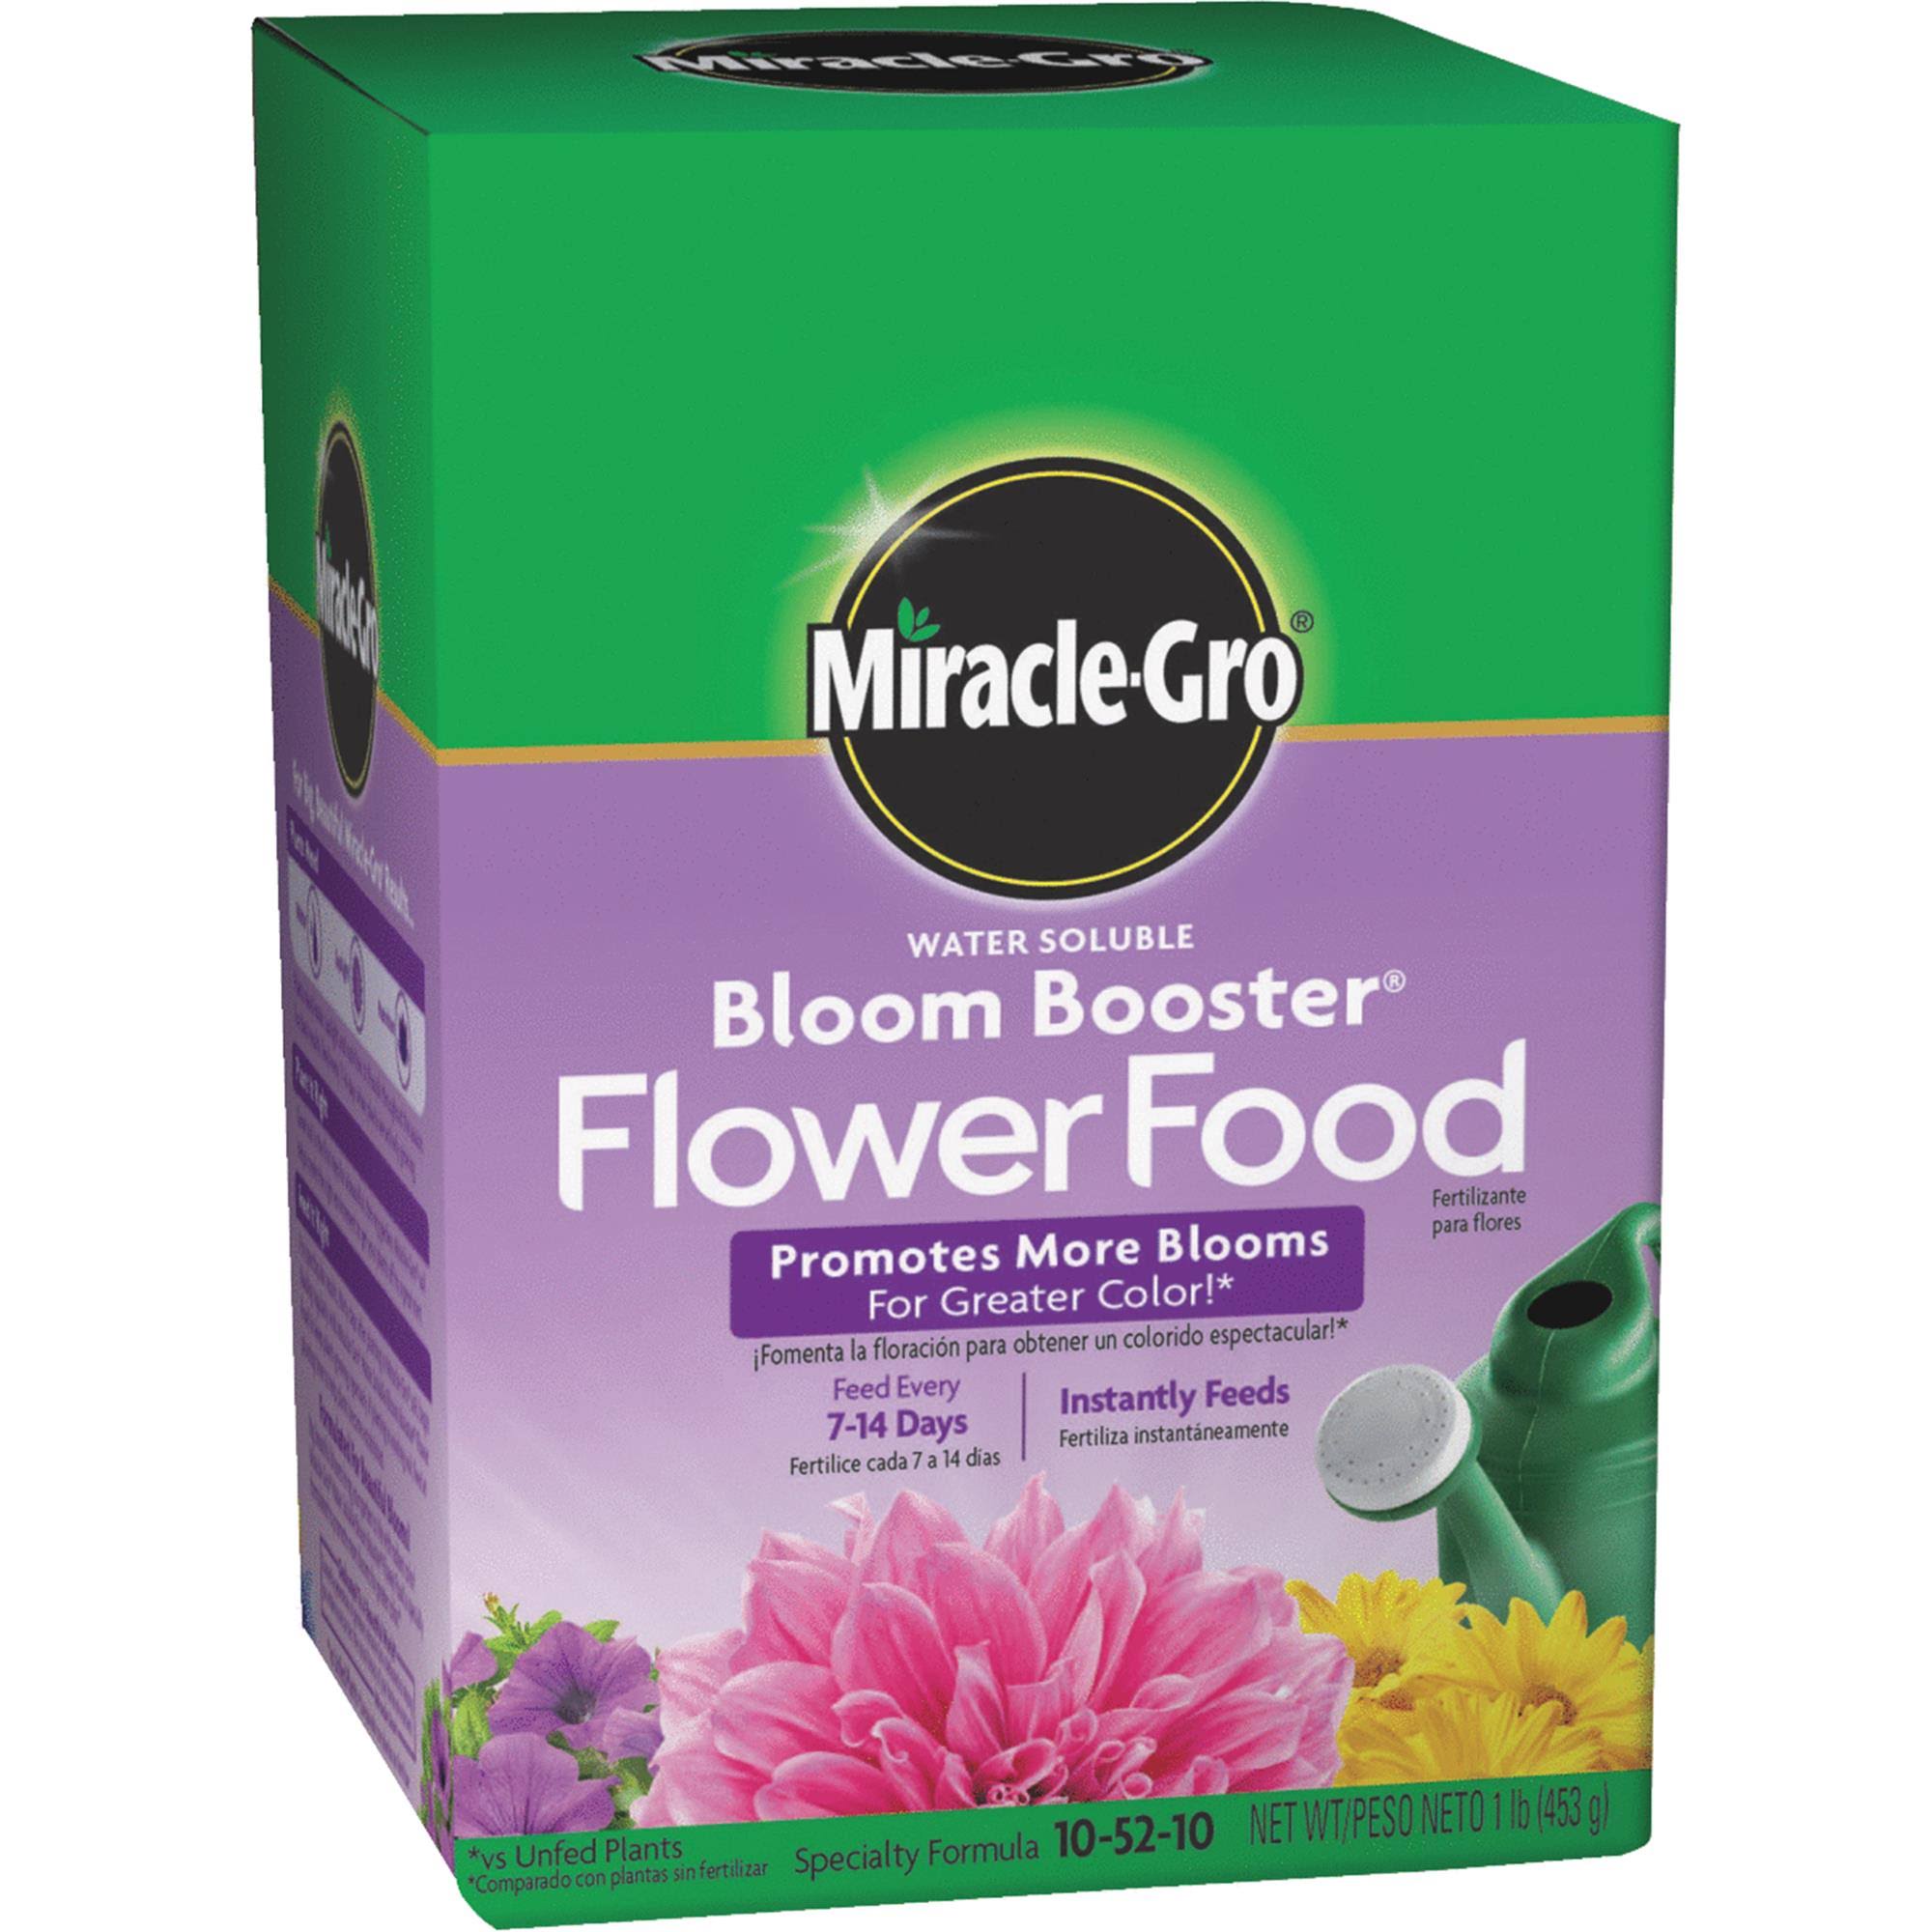 Miracle Gro Water Soluble Bloom Booster Flower Food - 1lb